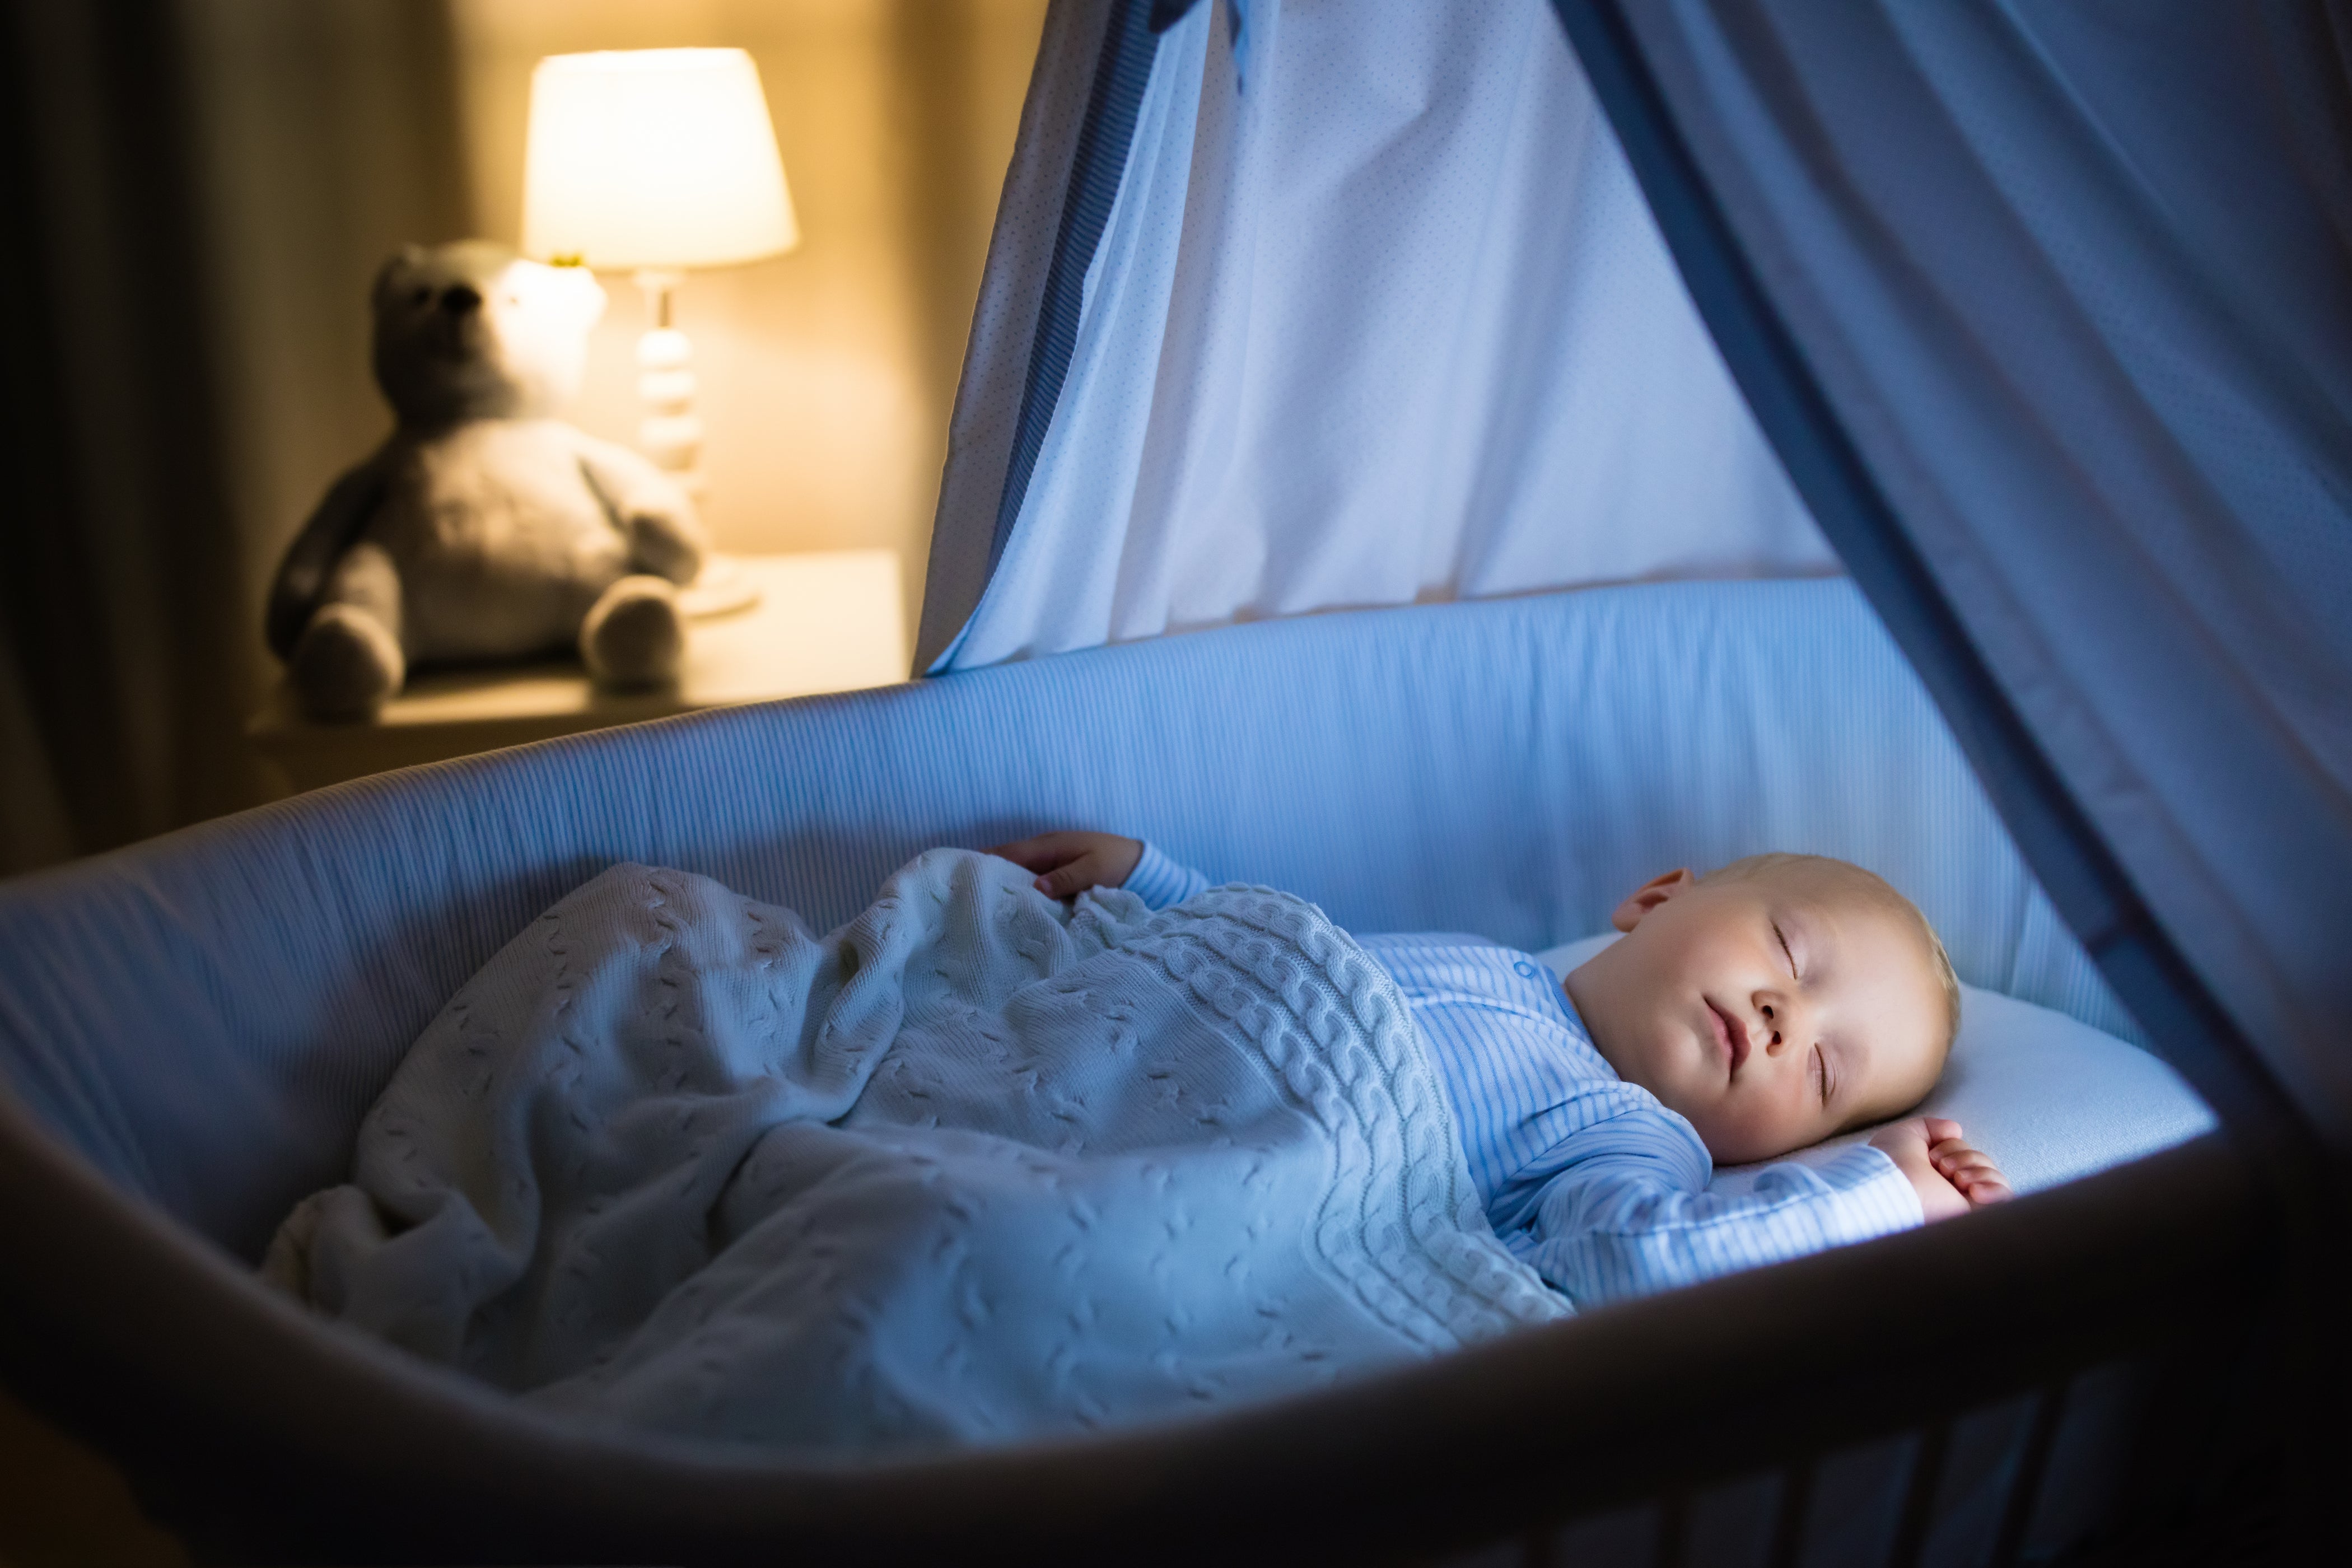 White noise for babies - The benefits & risks